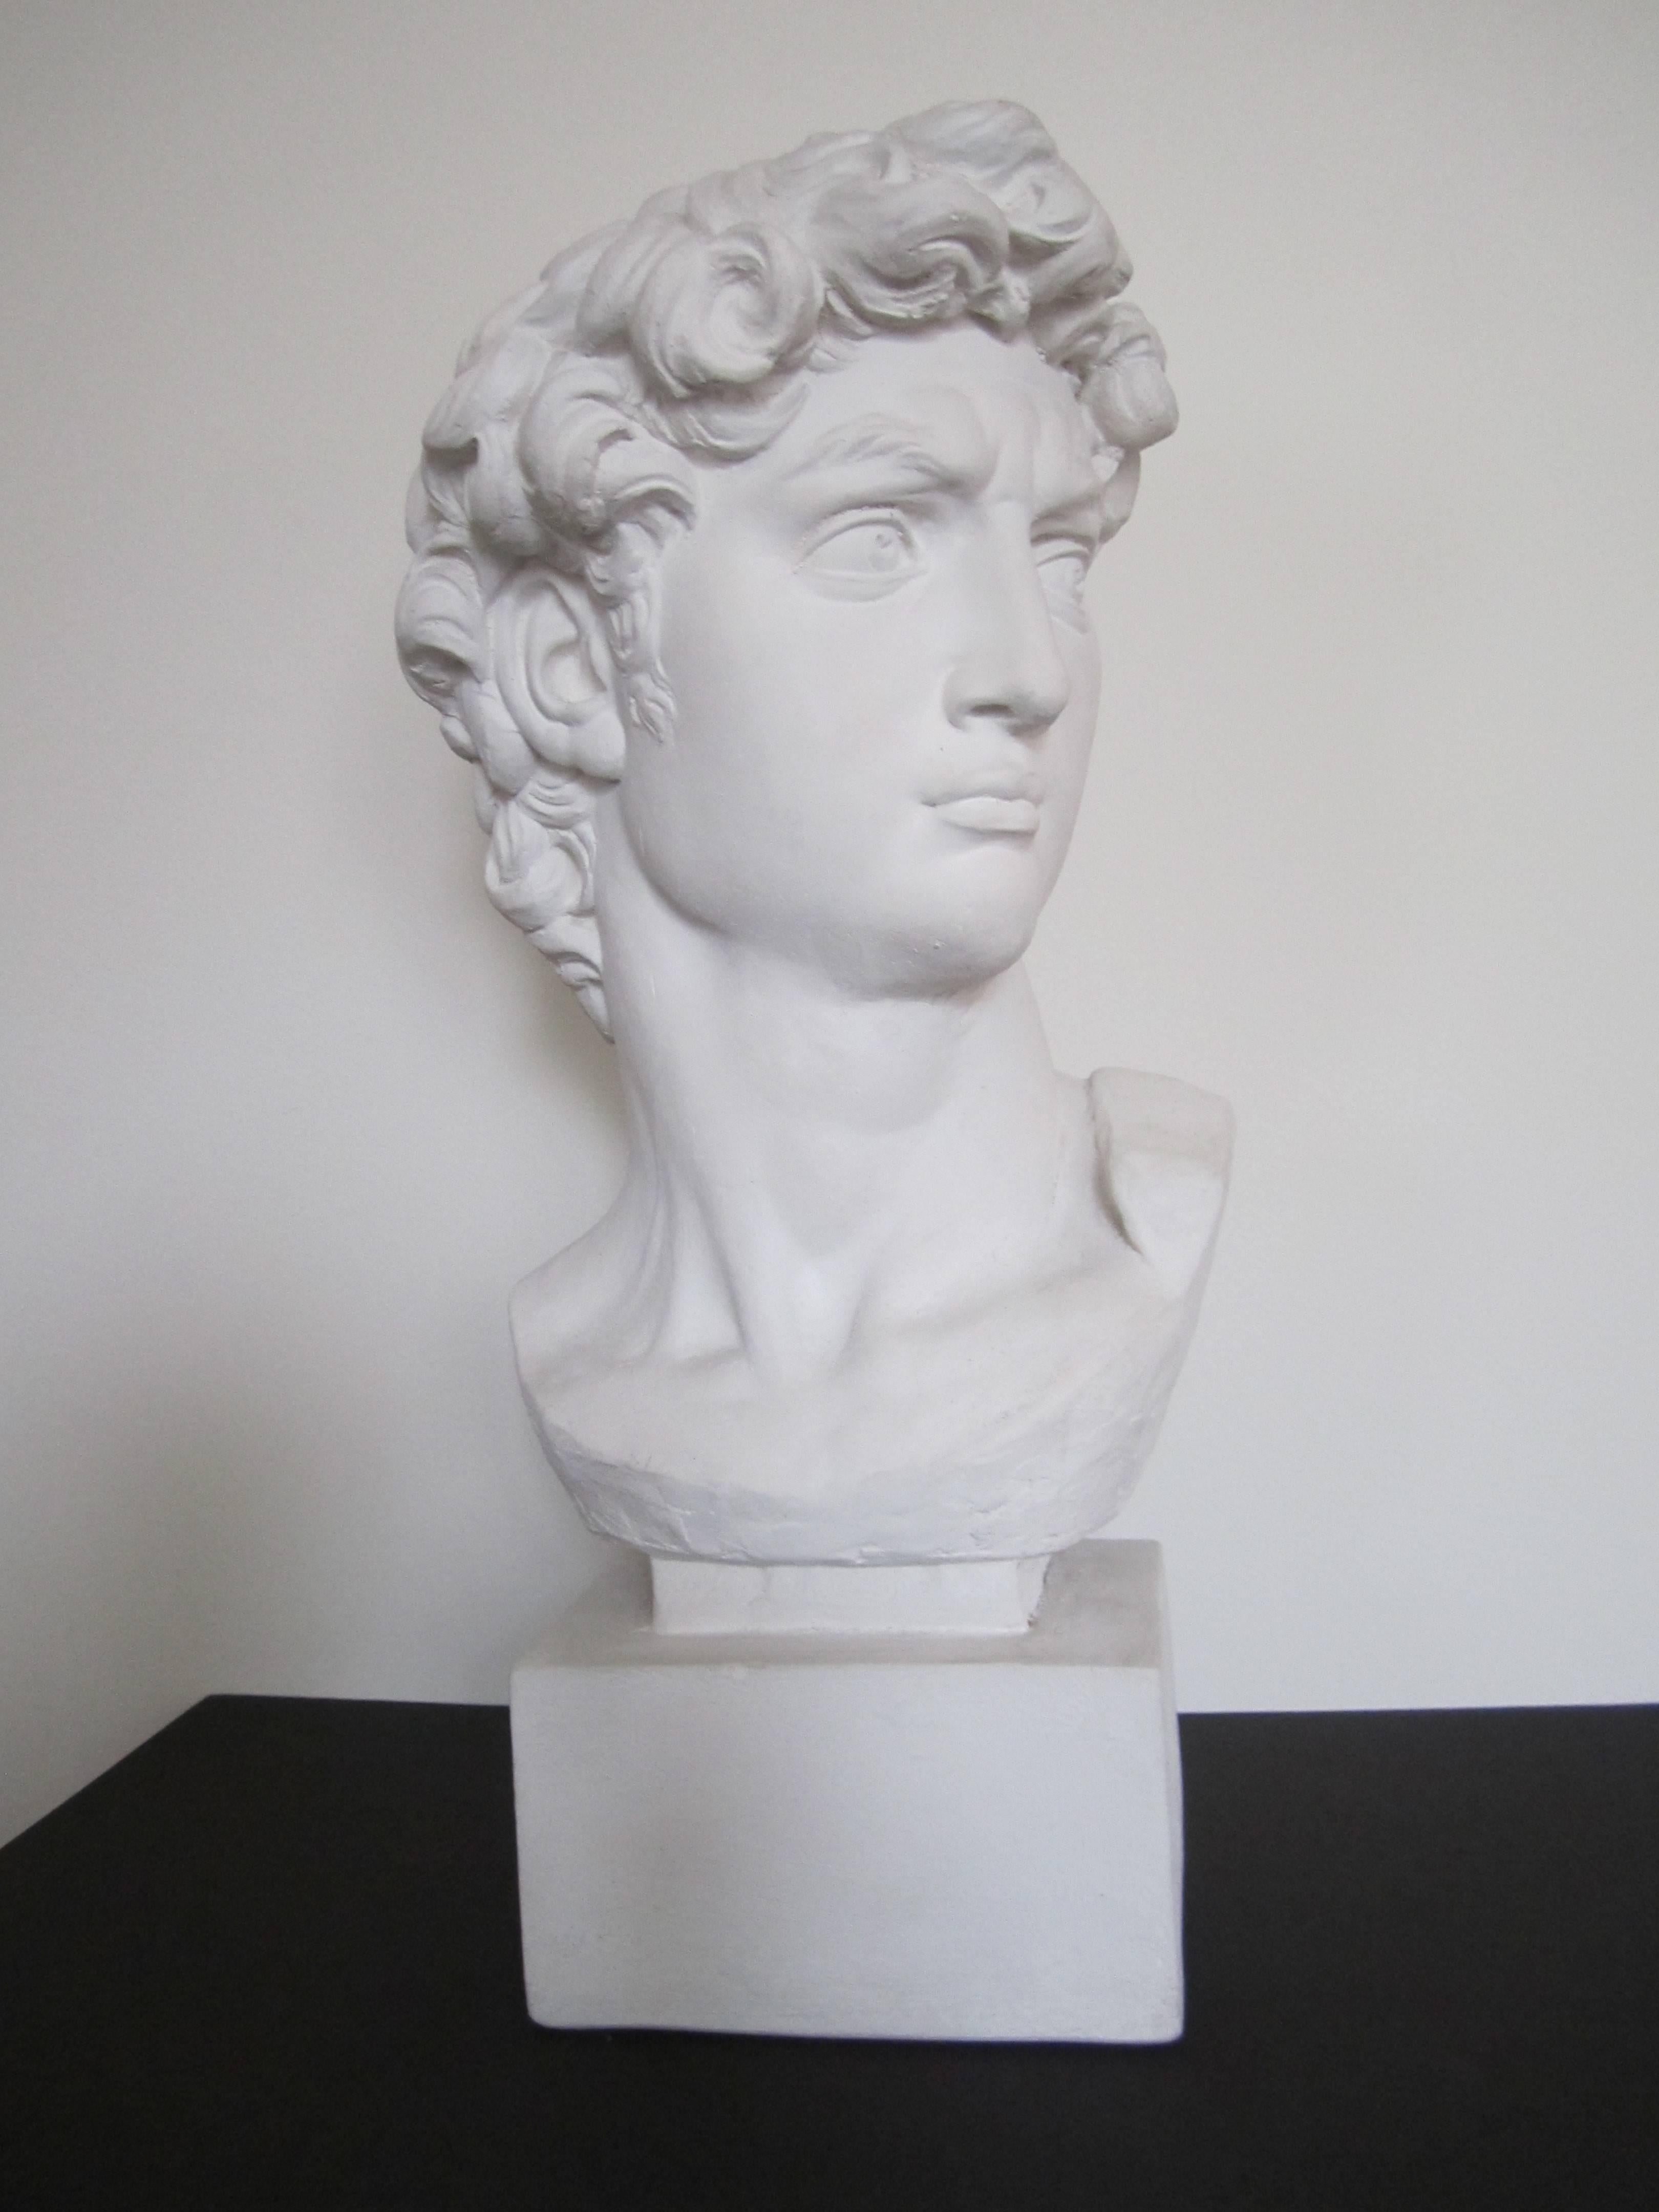 bust of david for sale